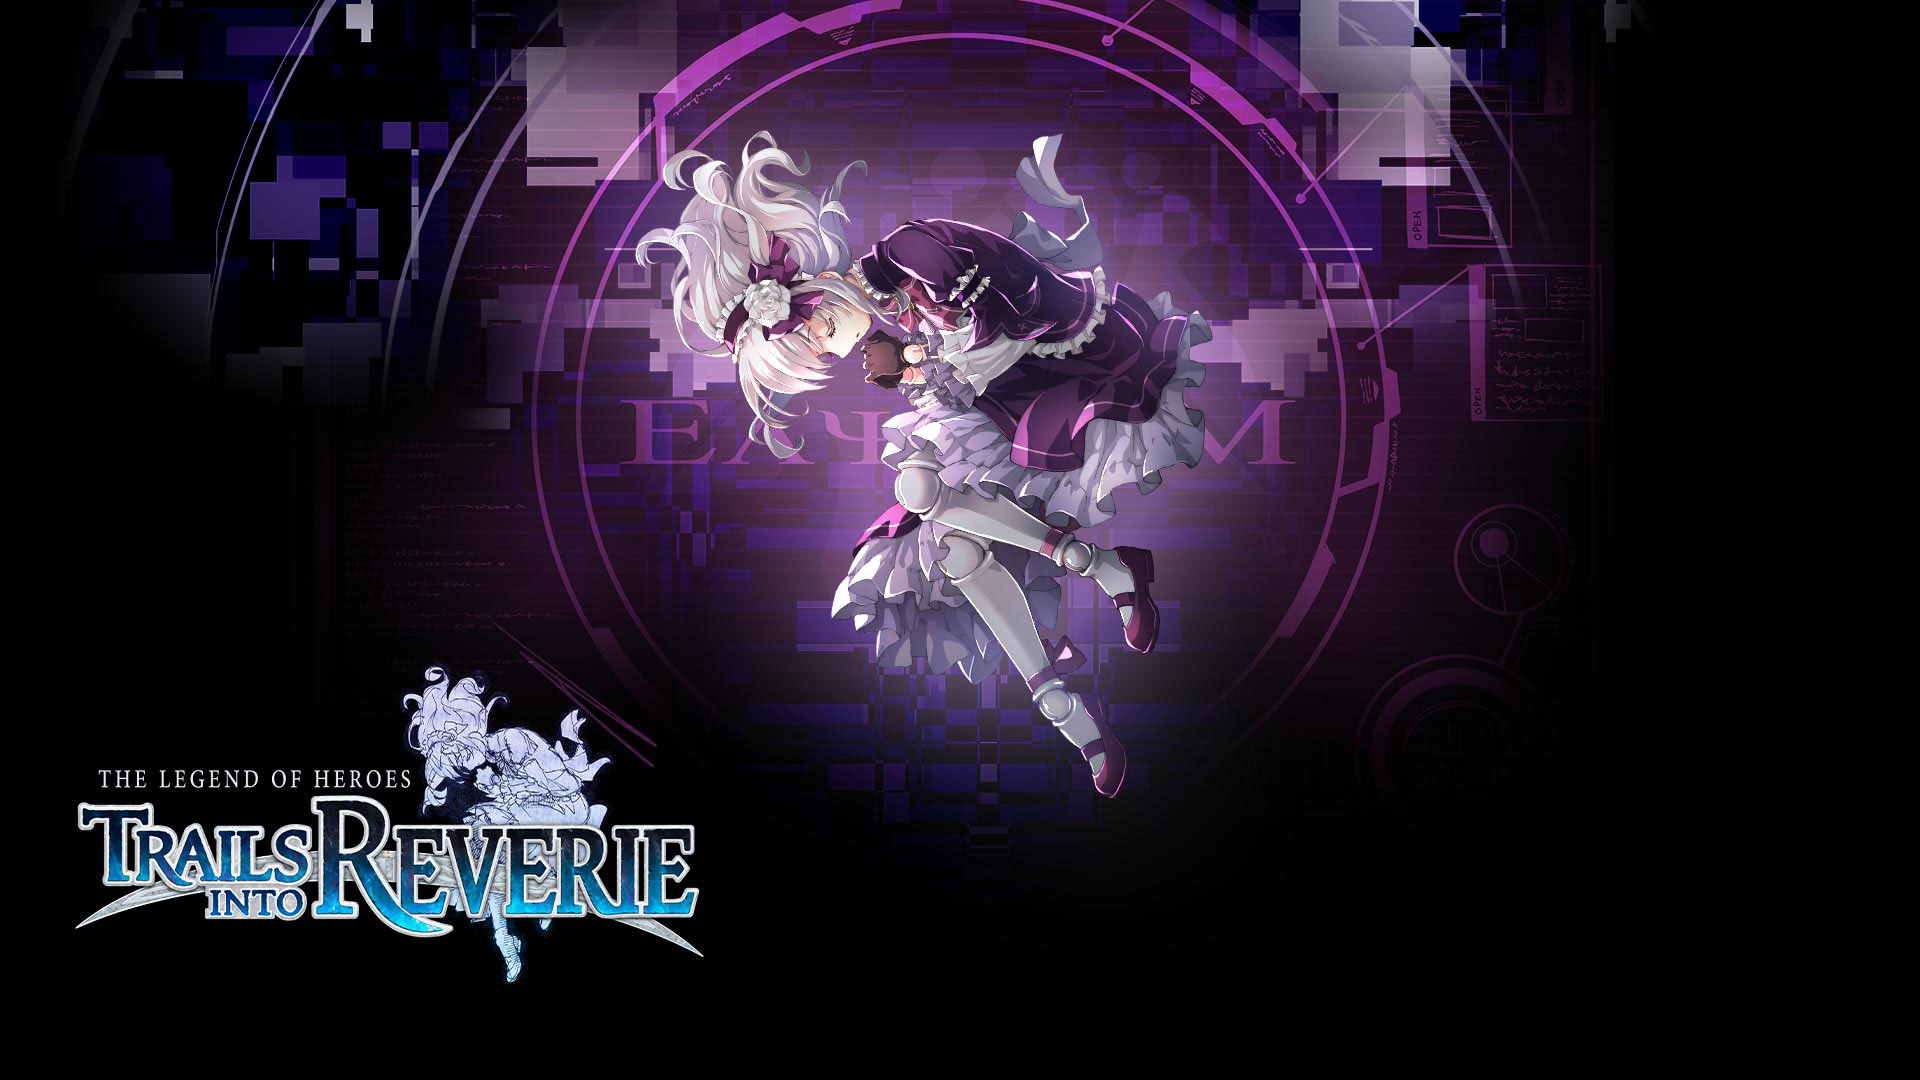 My thoughts on Trails into Reverie